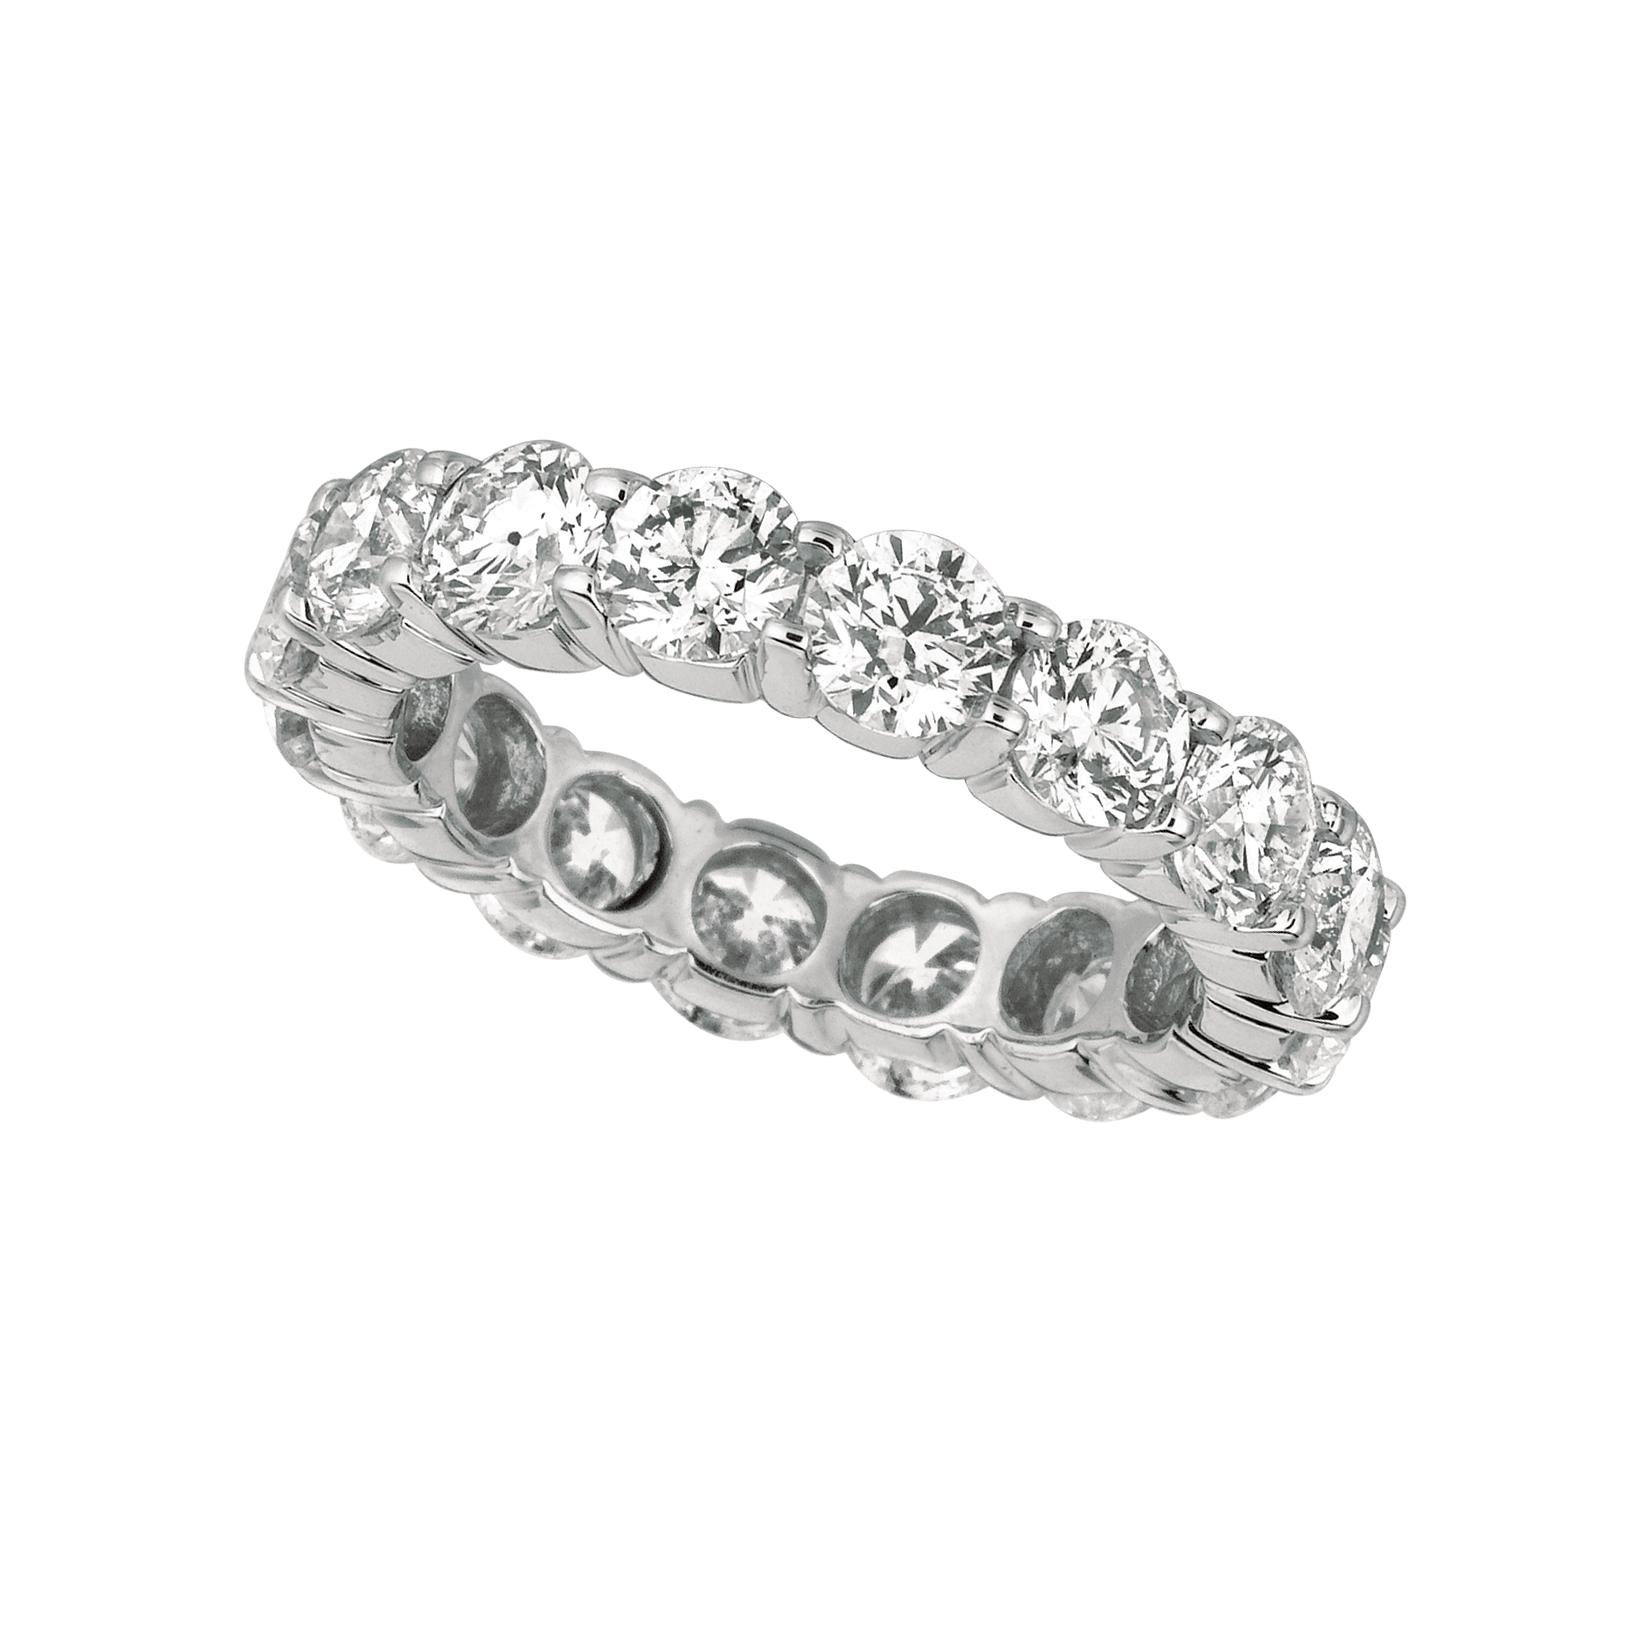 4.80 Carat Natural Diamond Eternity Band Ring G SI 18 Karat White Gold 16 Stones In New Condition For Sale In New York, NY